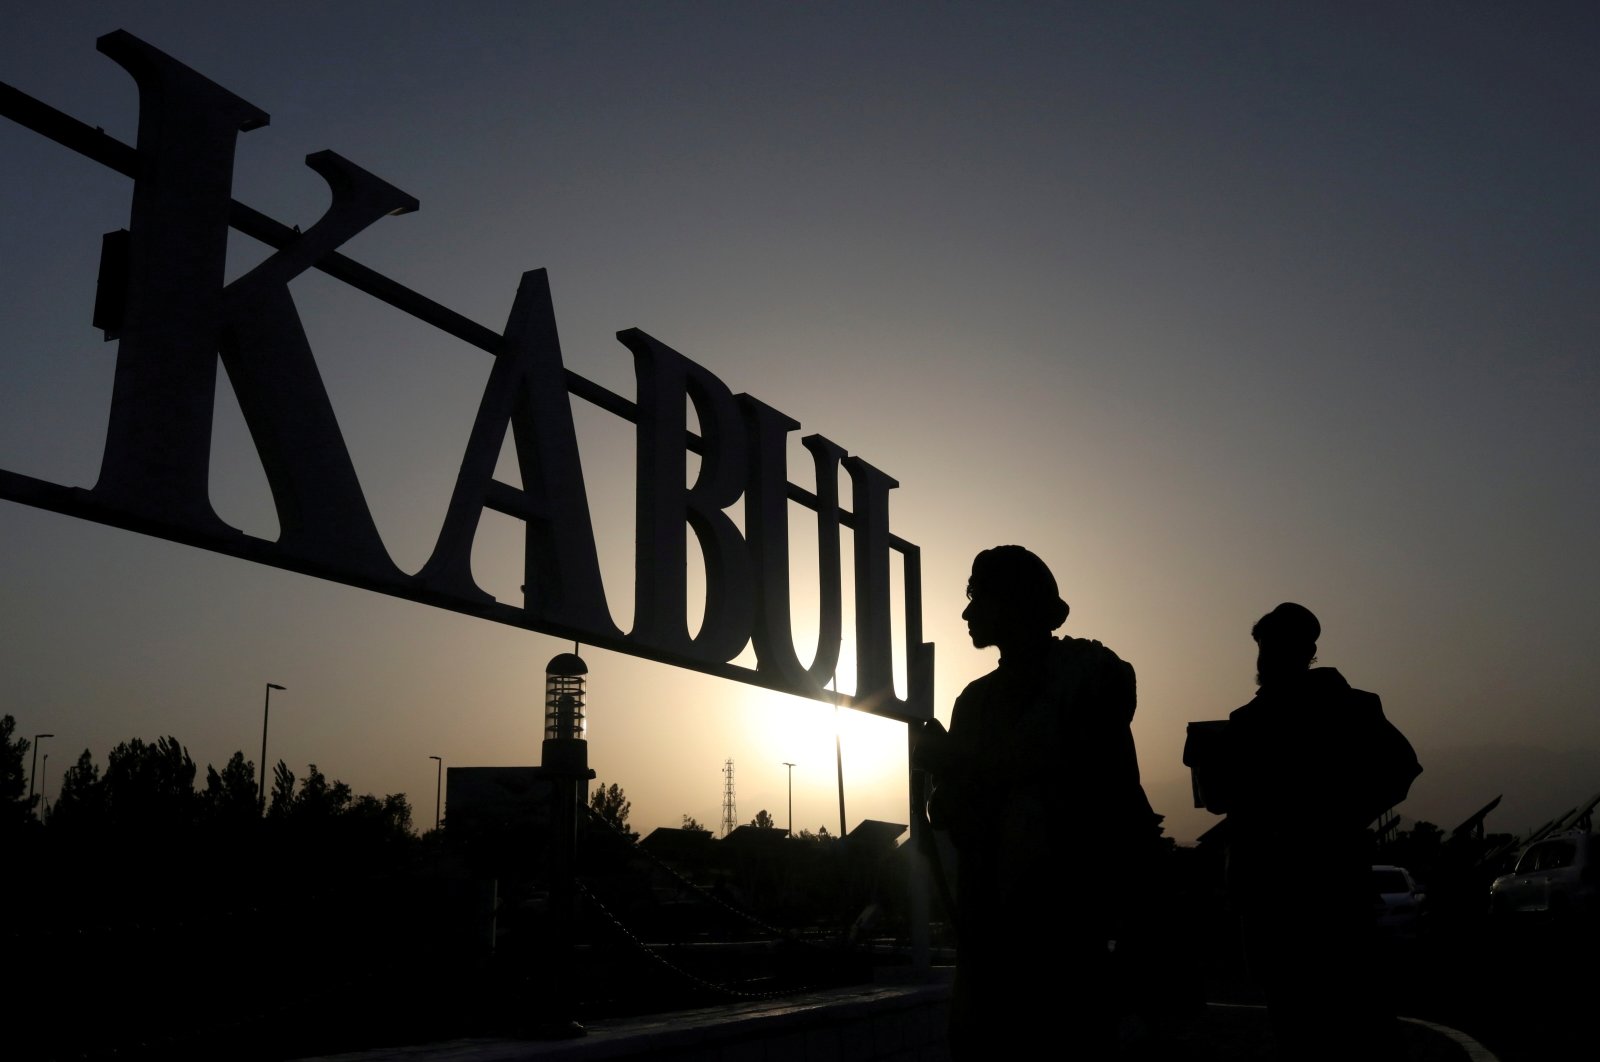 Taliban soldiers stand in front of a sign at Kabul Hamid Karzai International Airport  in Kabul, Afghanistan, Sept. 9, 2021. (REUTERS Photo)